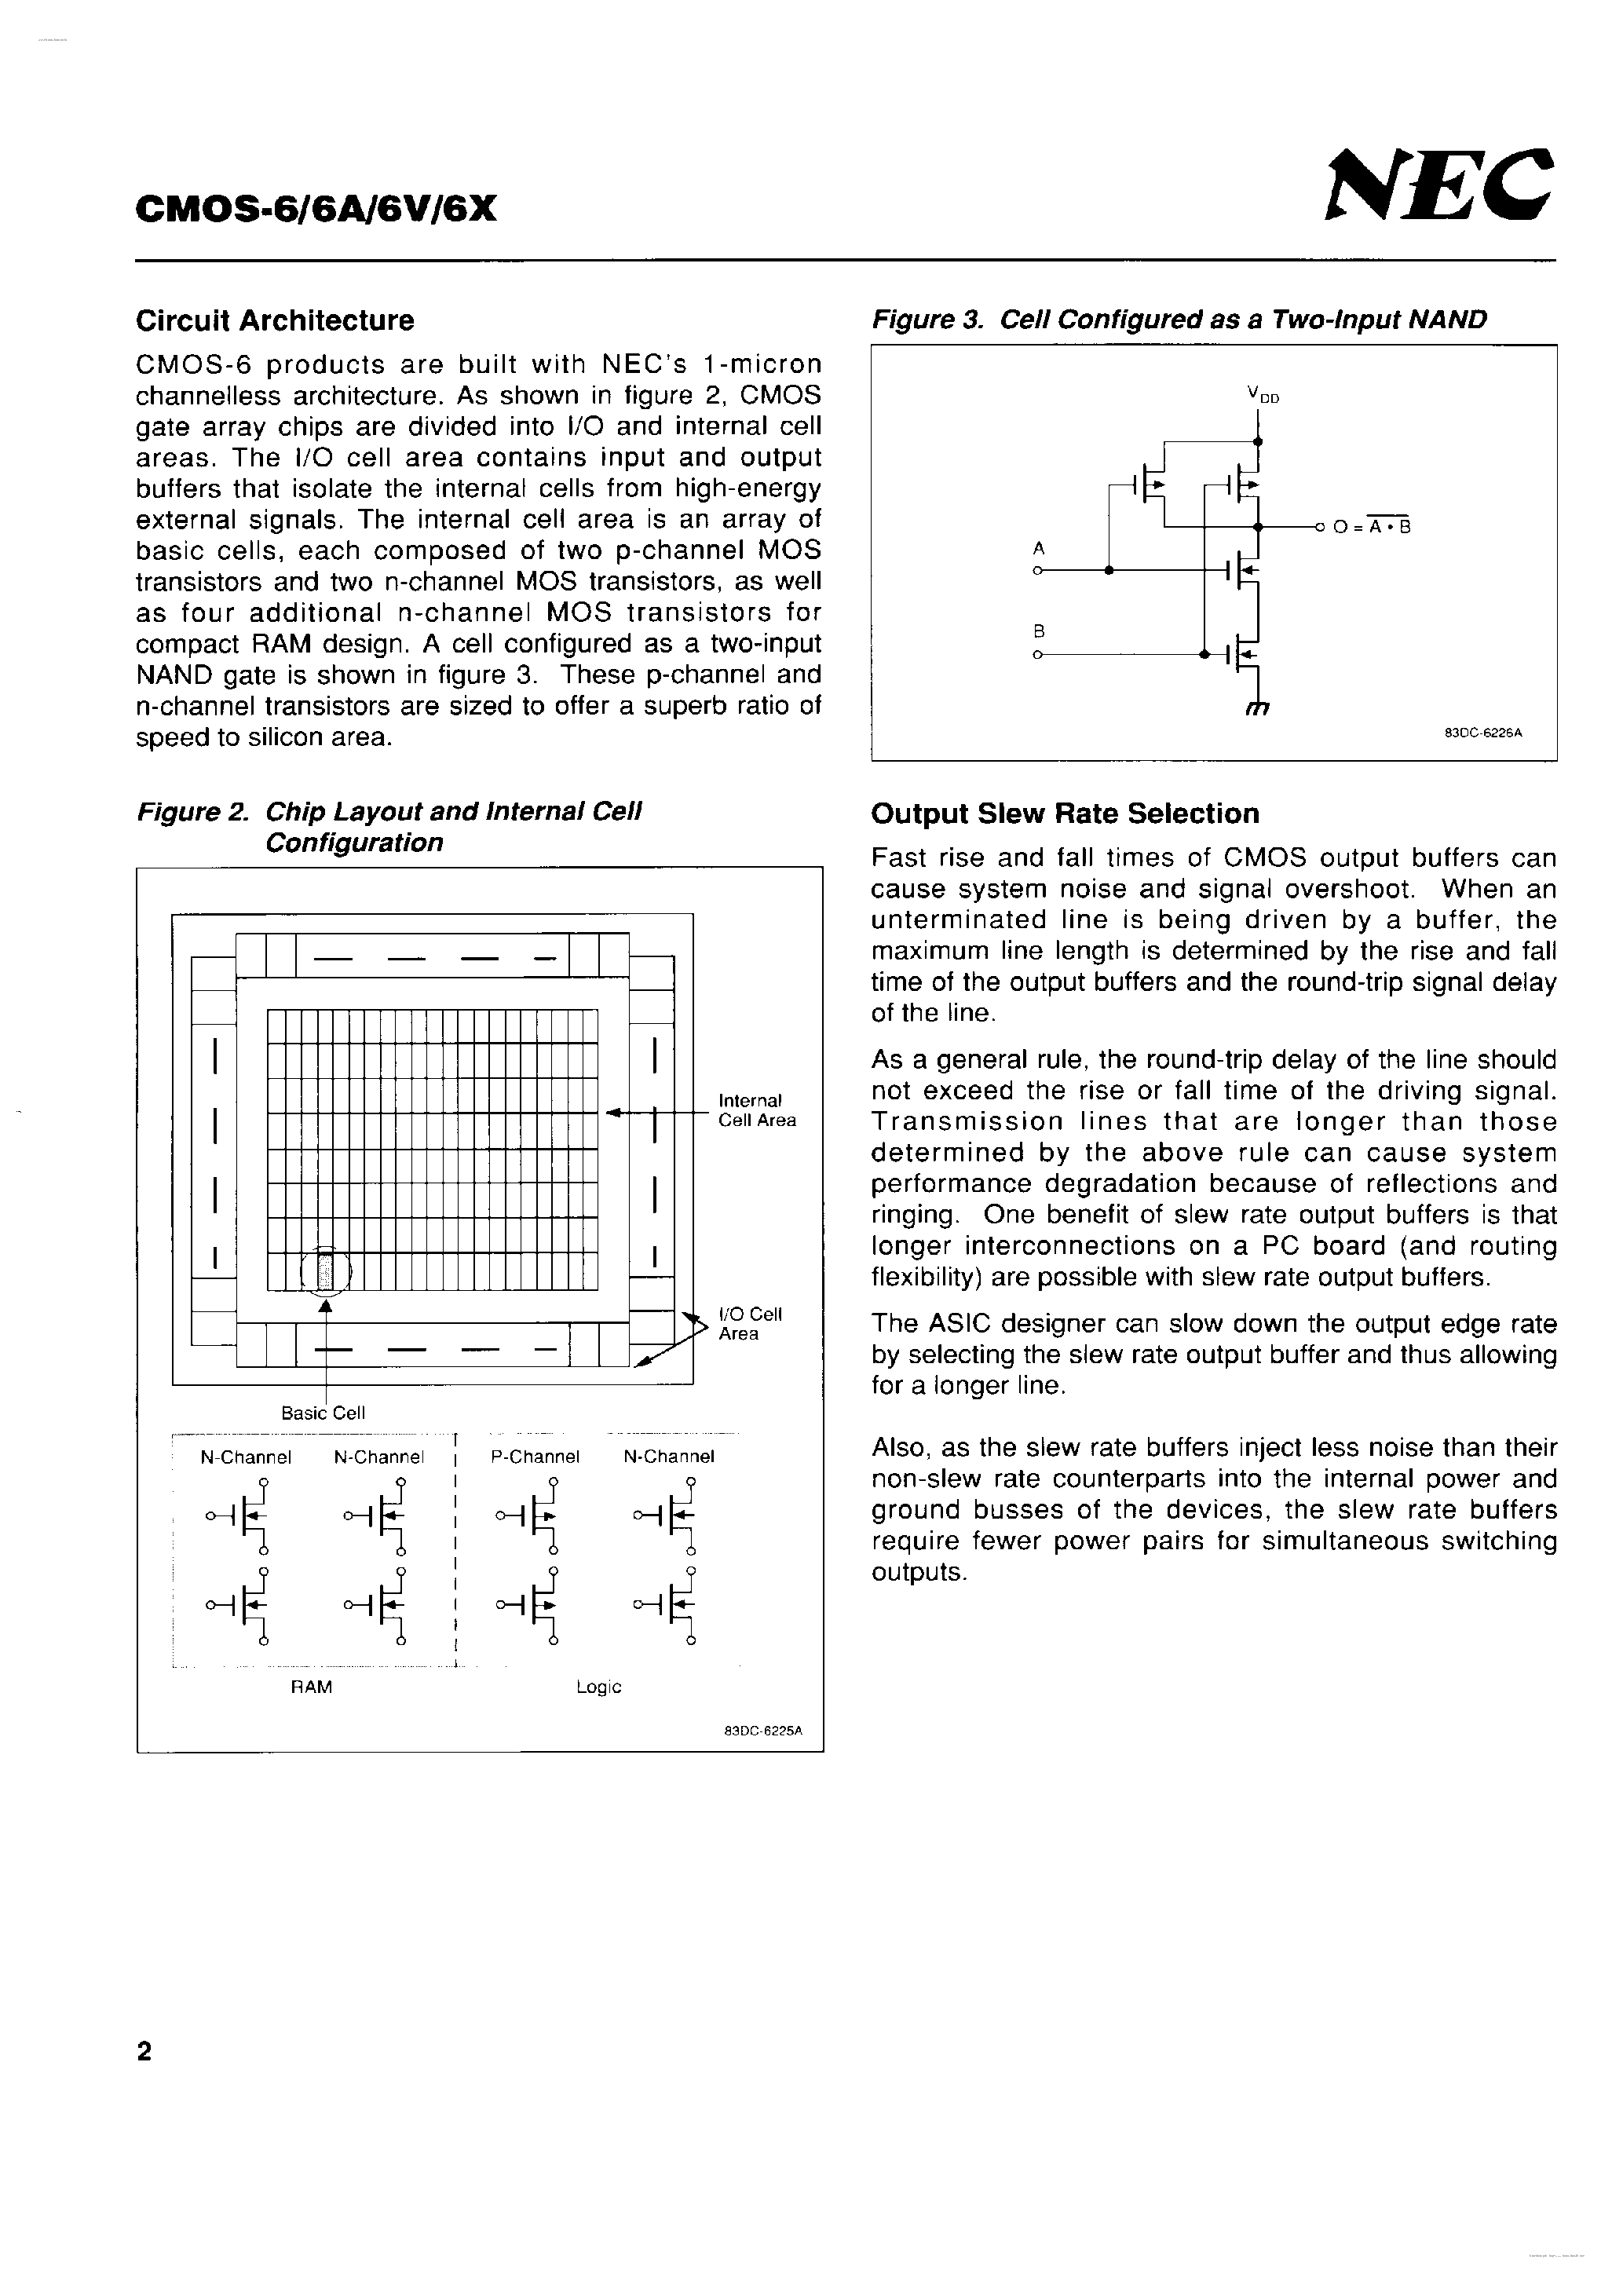 Datasheet UPD65650 - (UPD65650 - UPD65658) CMOS-6/6A/6V/6X 1.0-MICRON CMOS GATE ARRAYS page 2